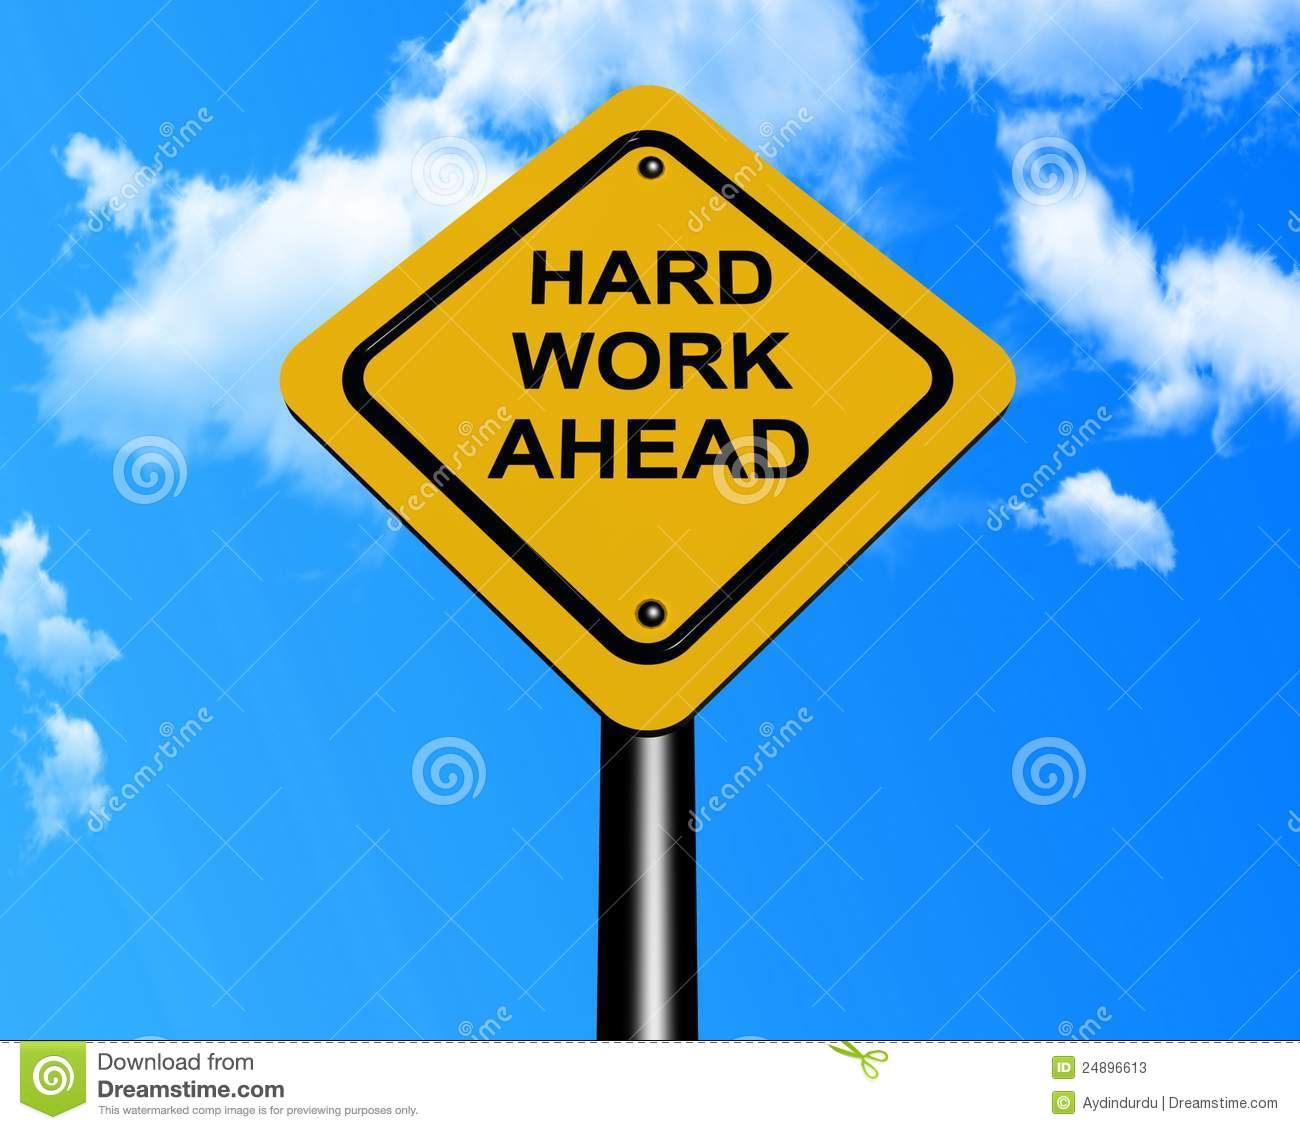 Illustration Of Hard Work Ahead Sign With Blue Sky And Cloudscape